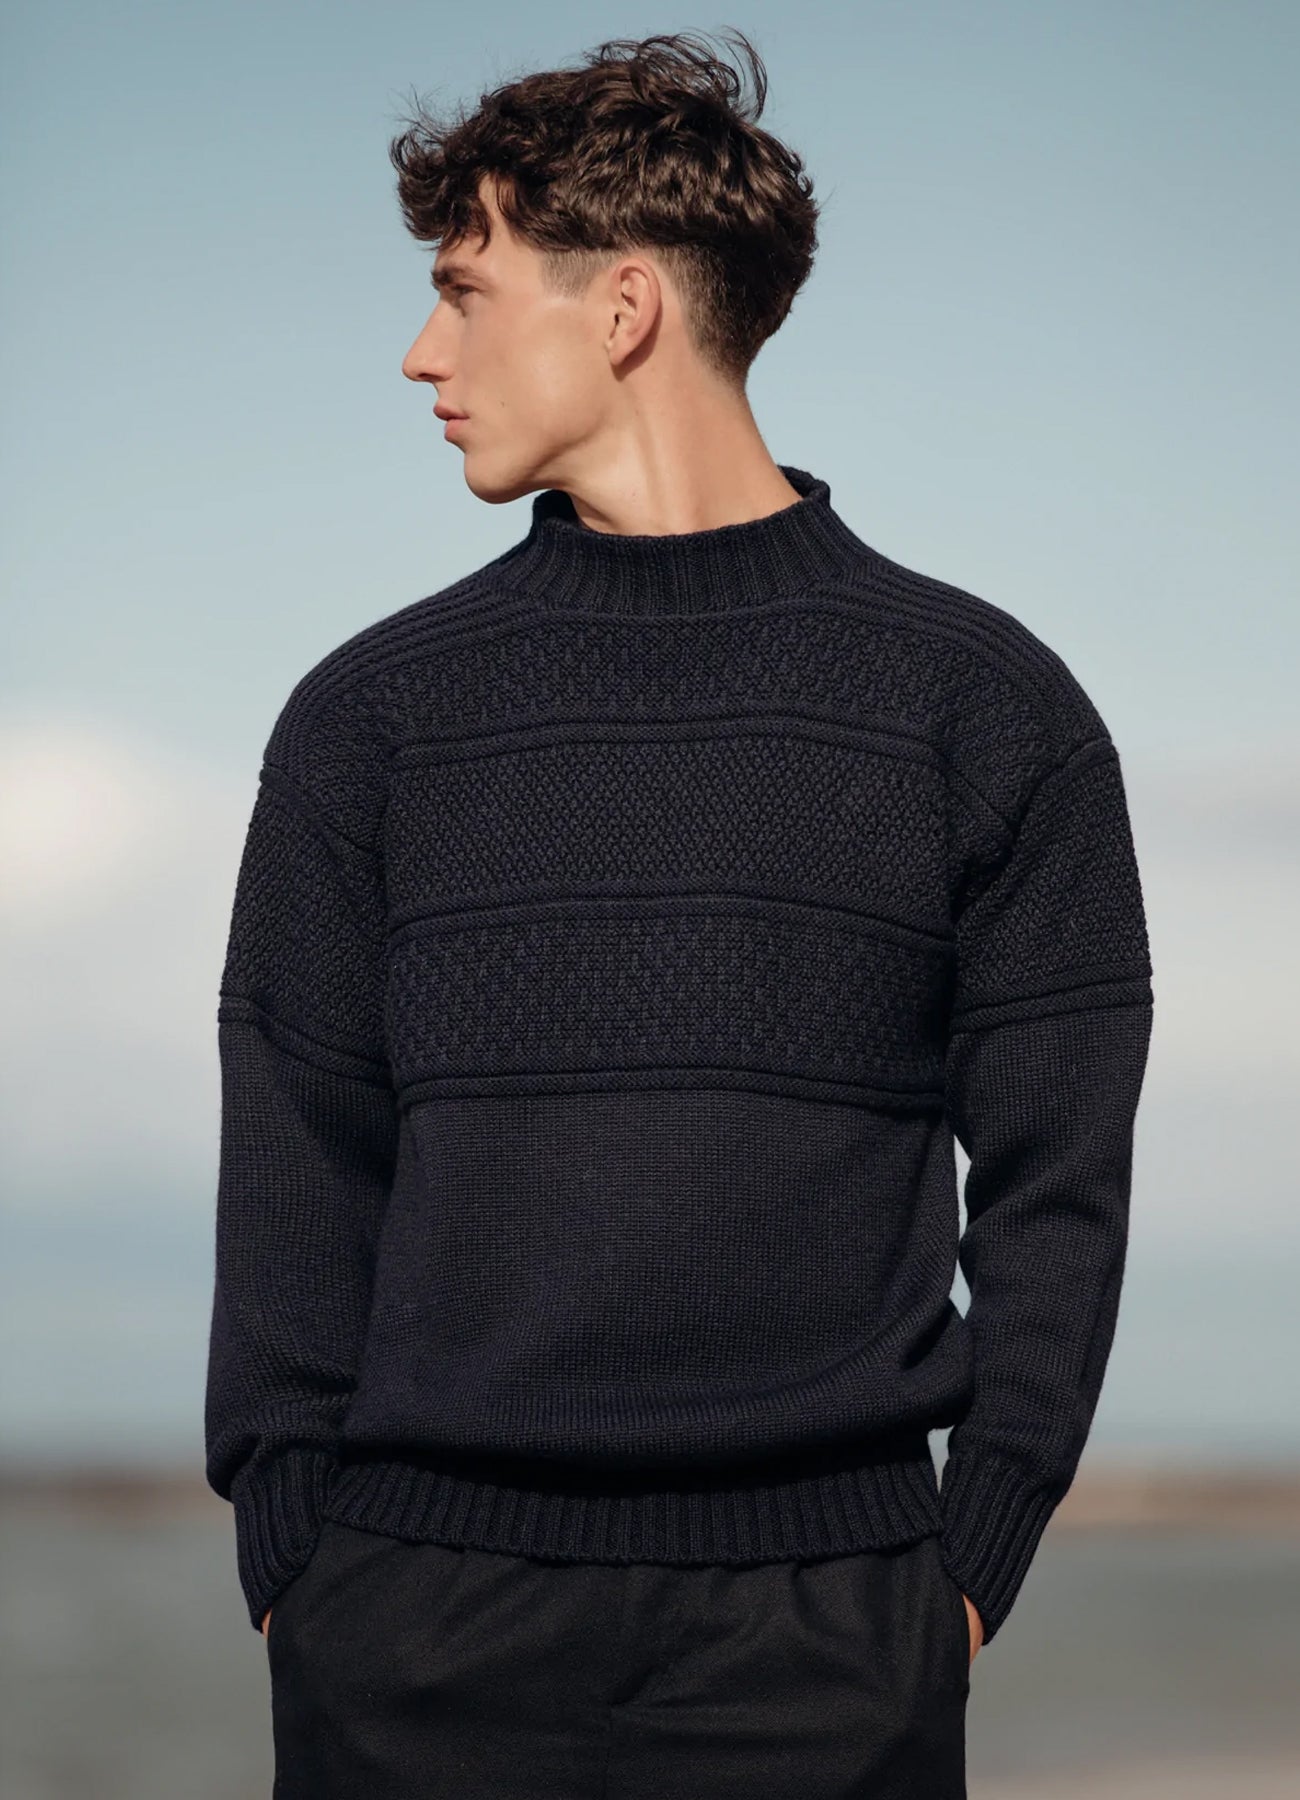 A man wearing a heritage knitted wool sweater, made in Scotland.